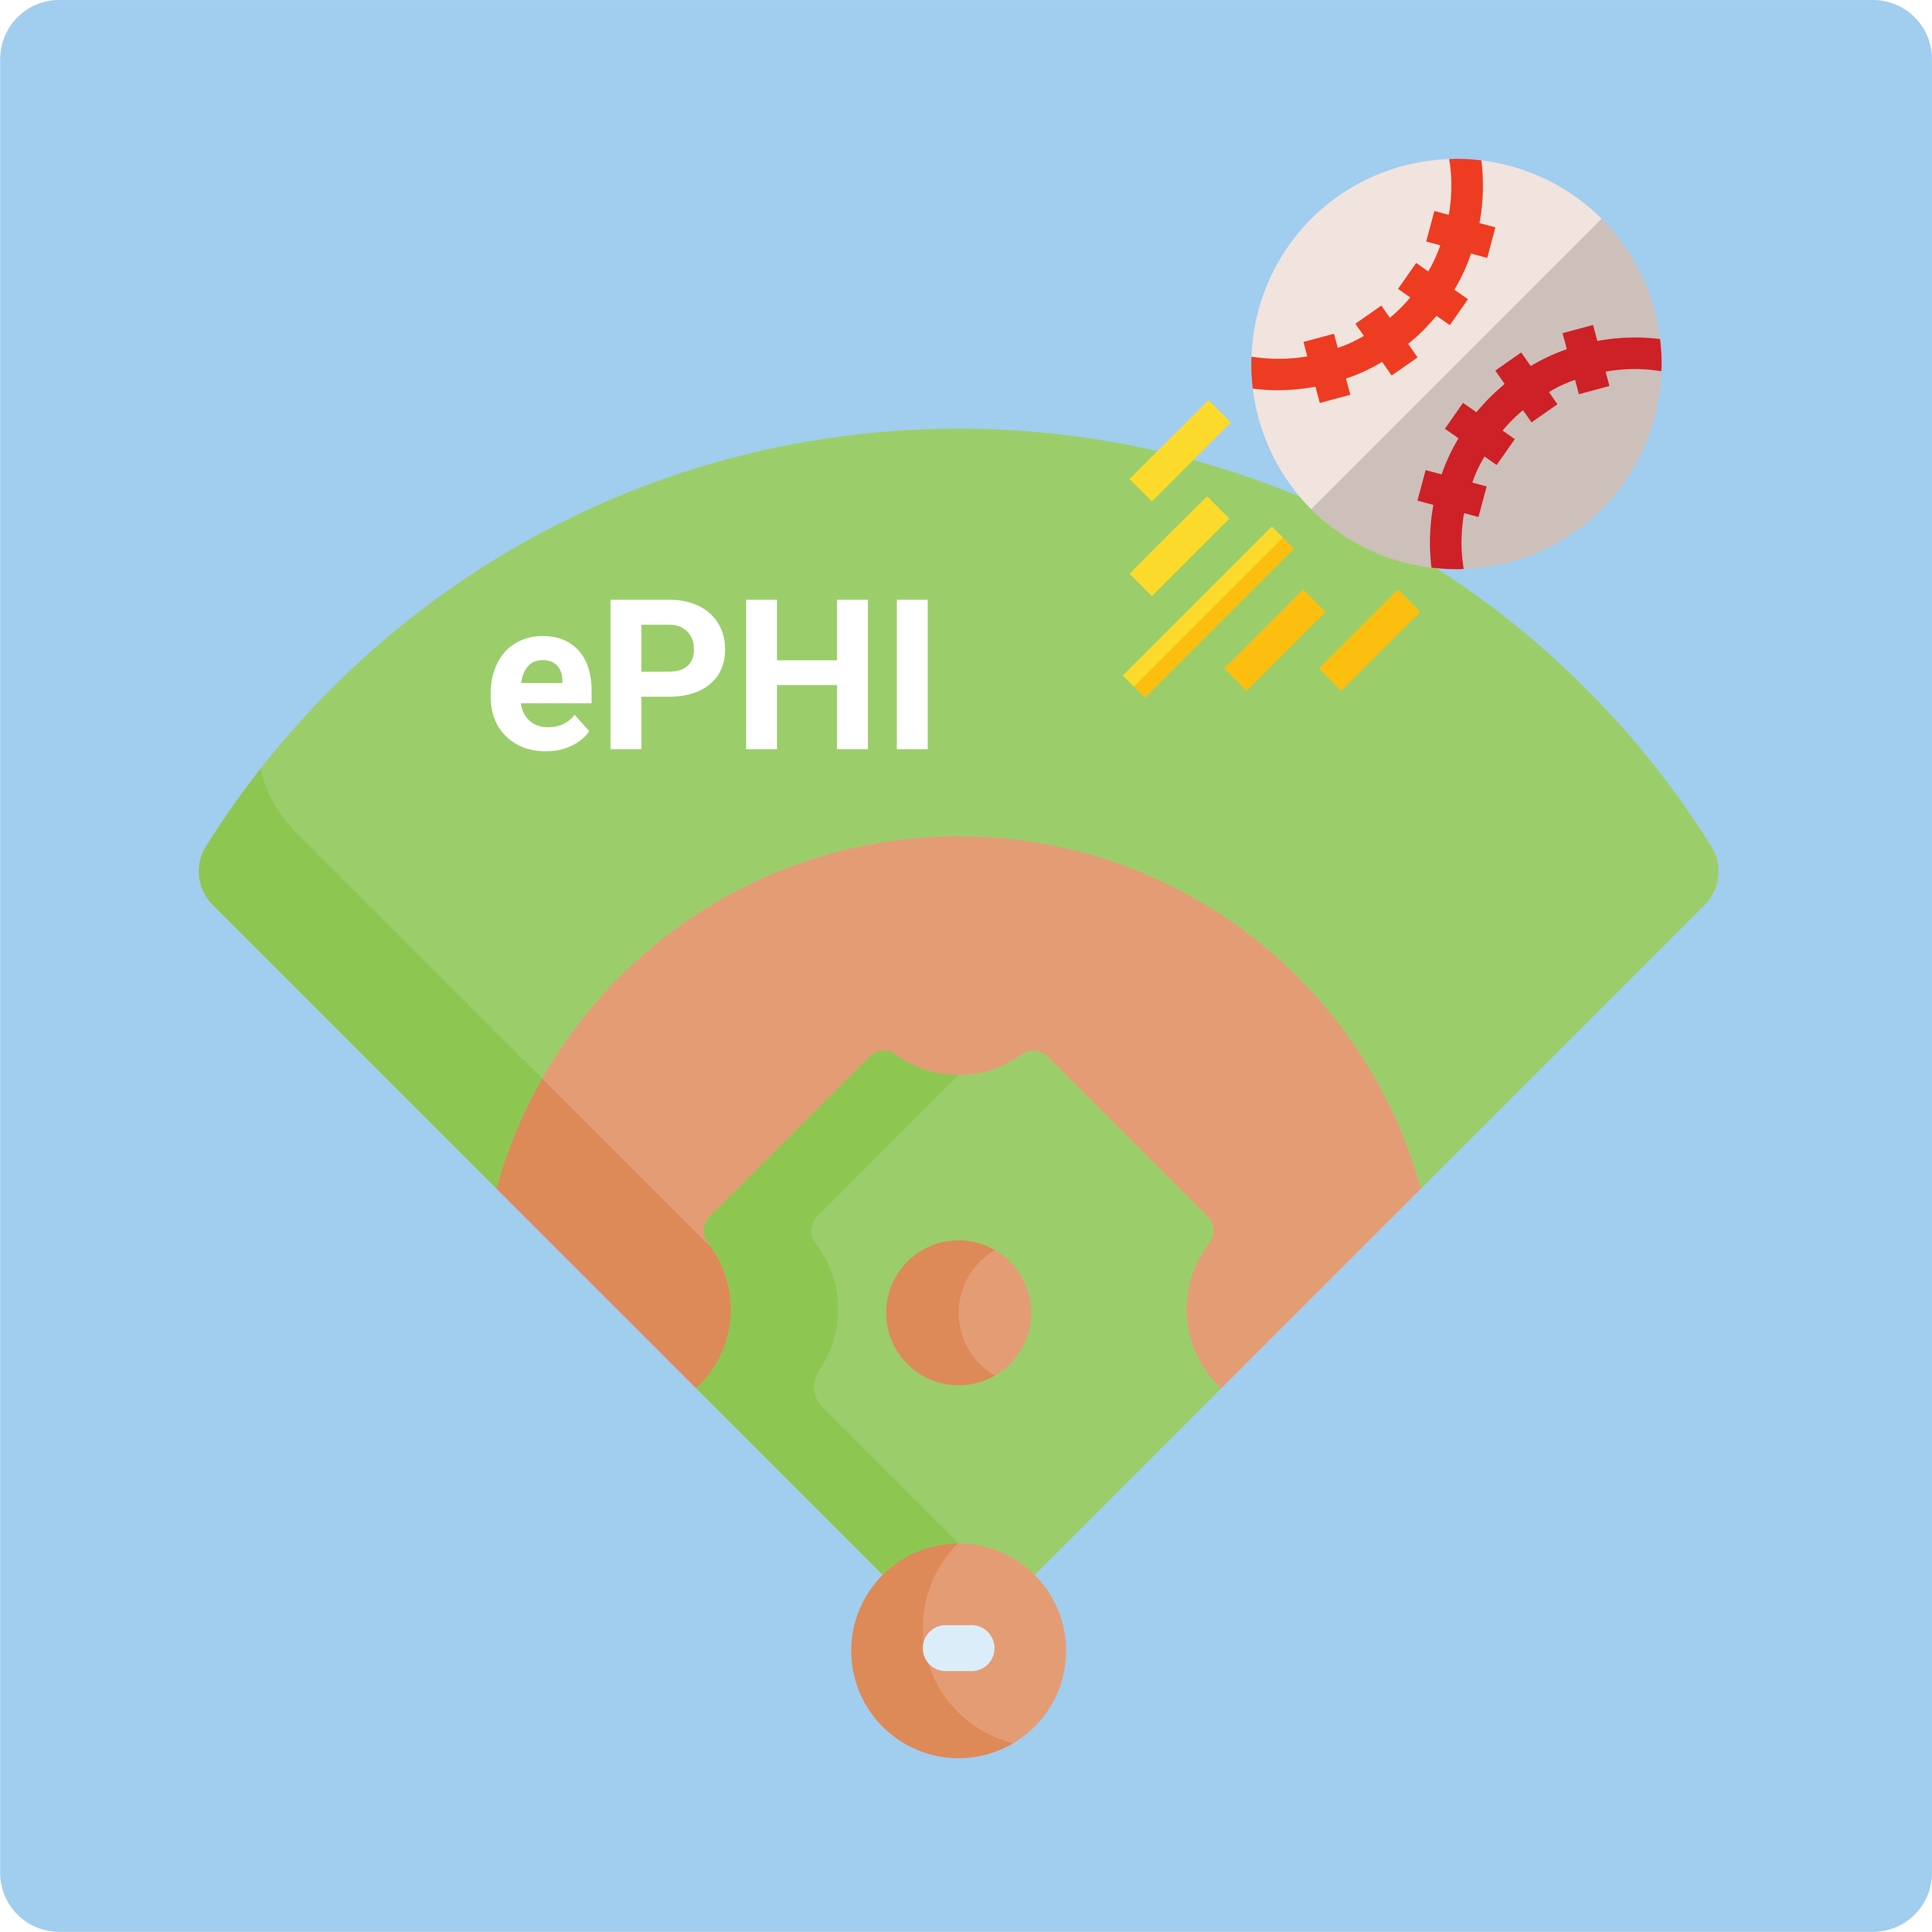 Toothpaste, Baseball, and ePHI